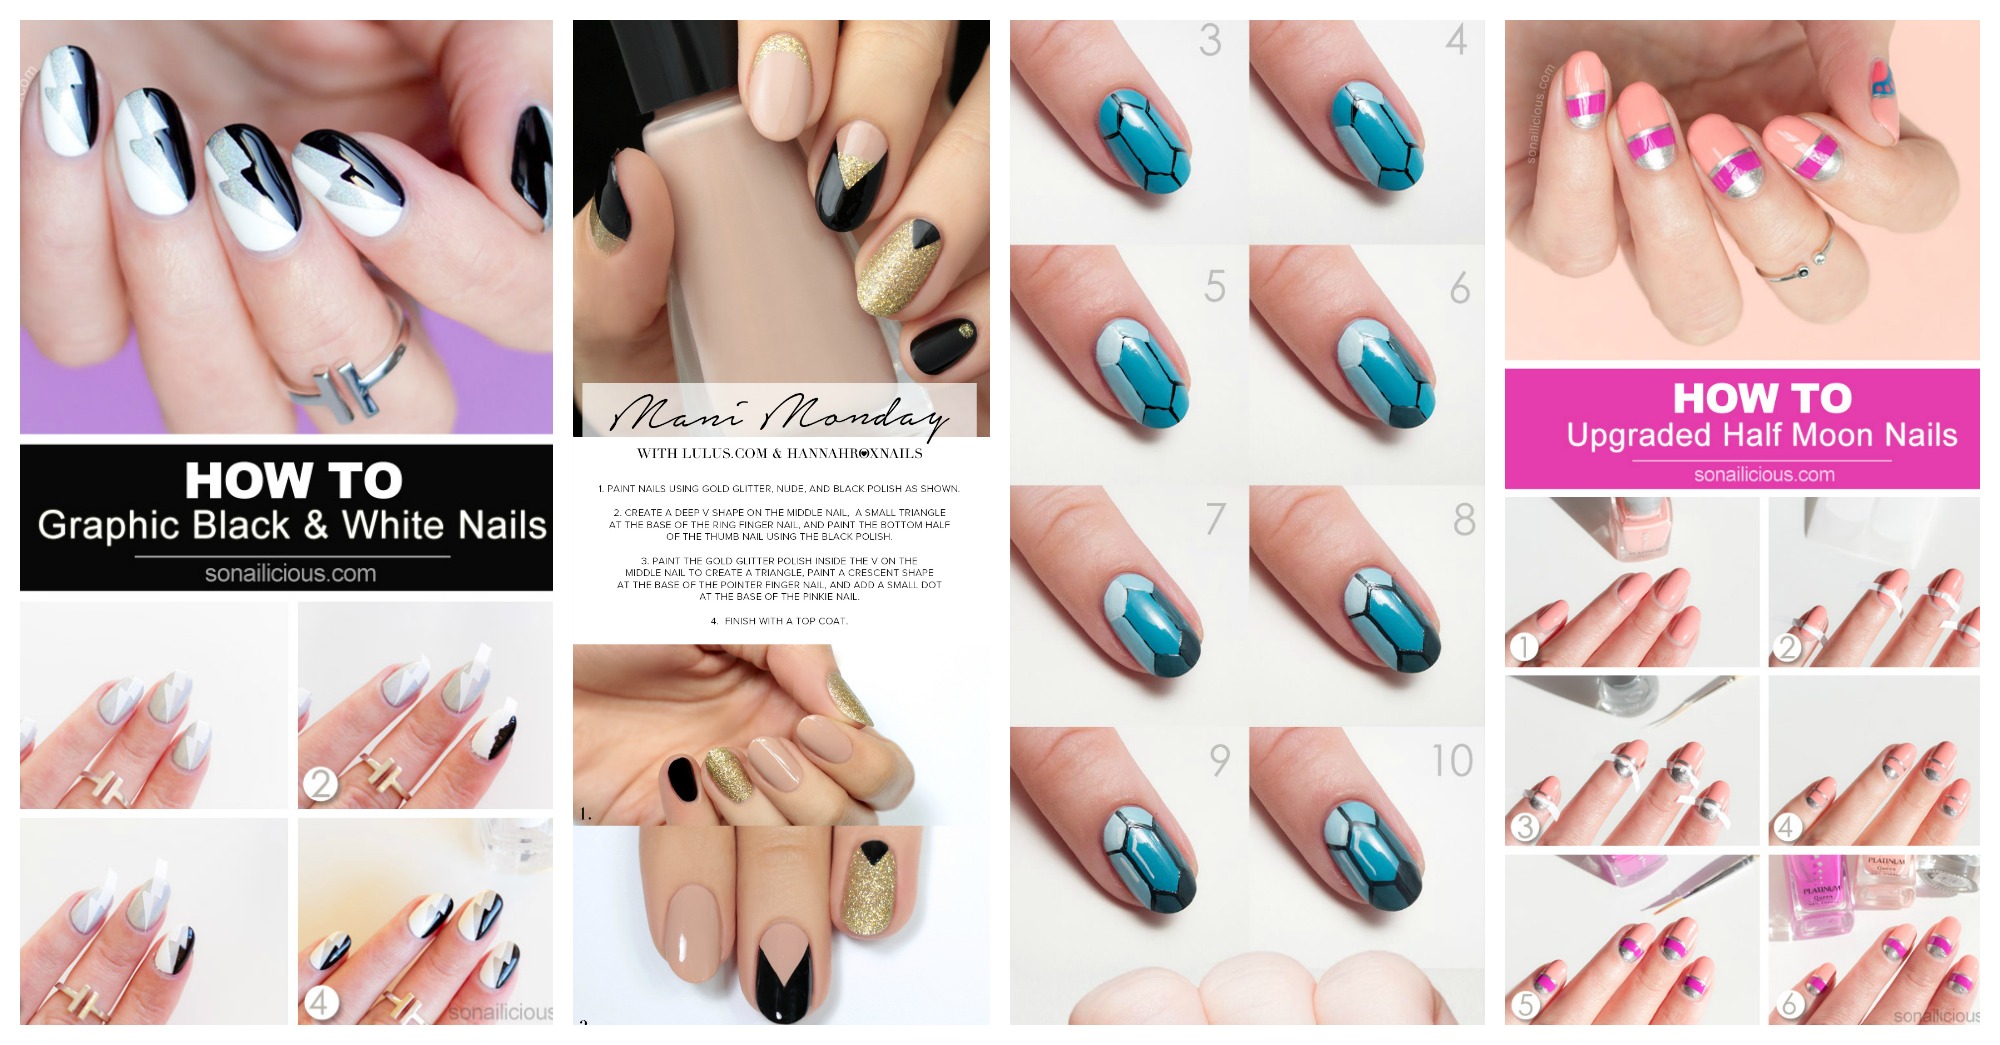 1. Step by Step Nail Design Tutorials - wide 6